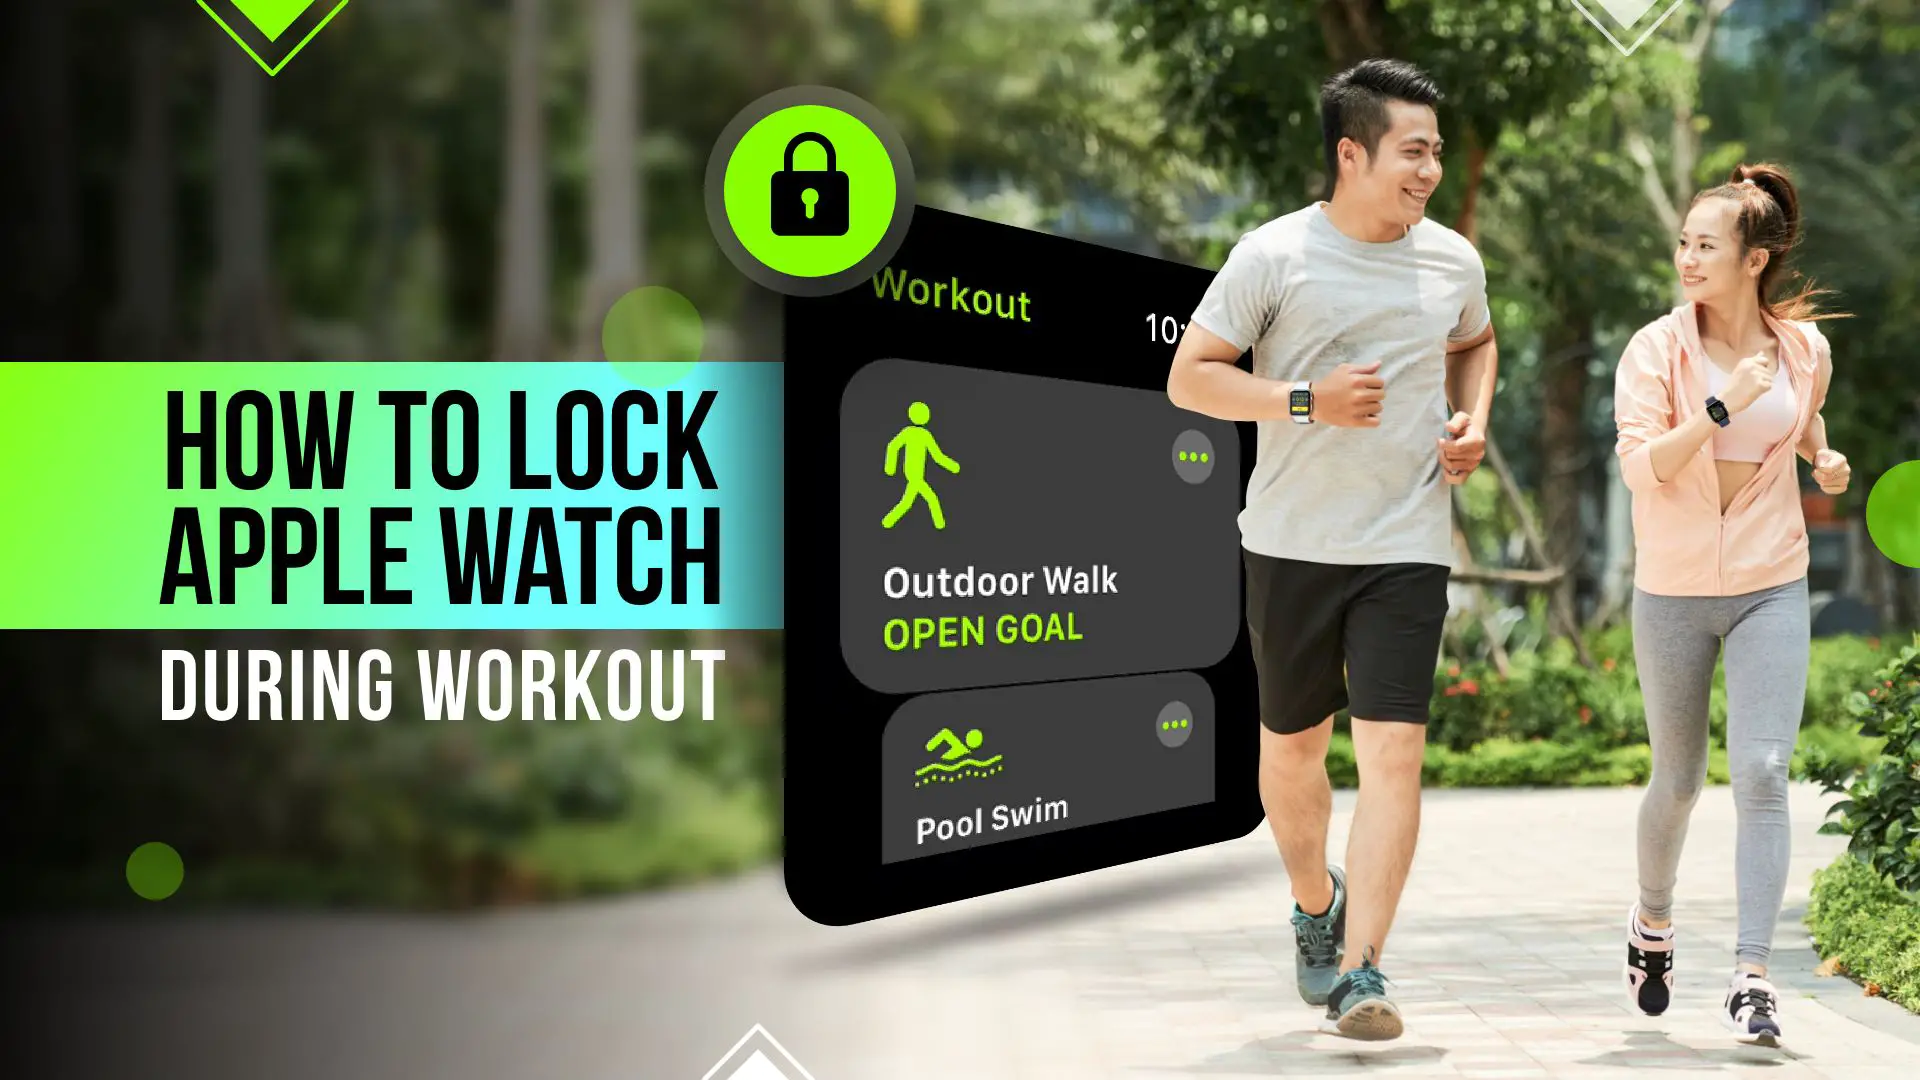 How to Lock Apple Watch During Workout and Unlock it